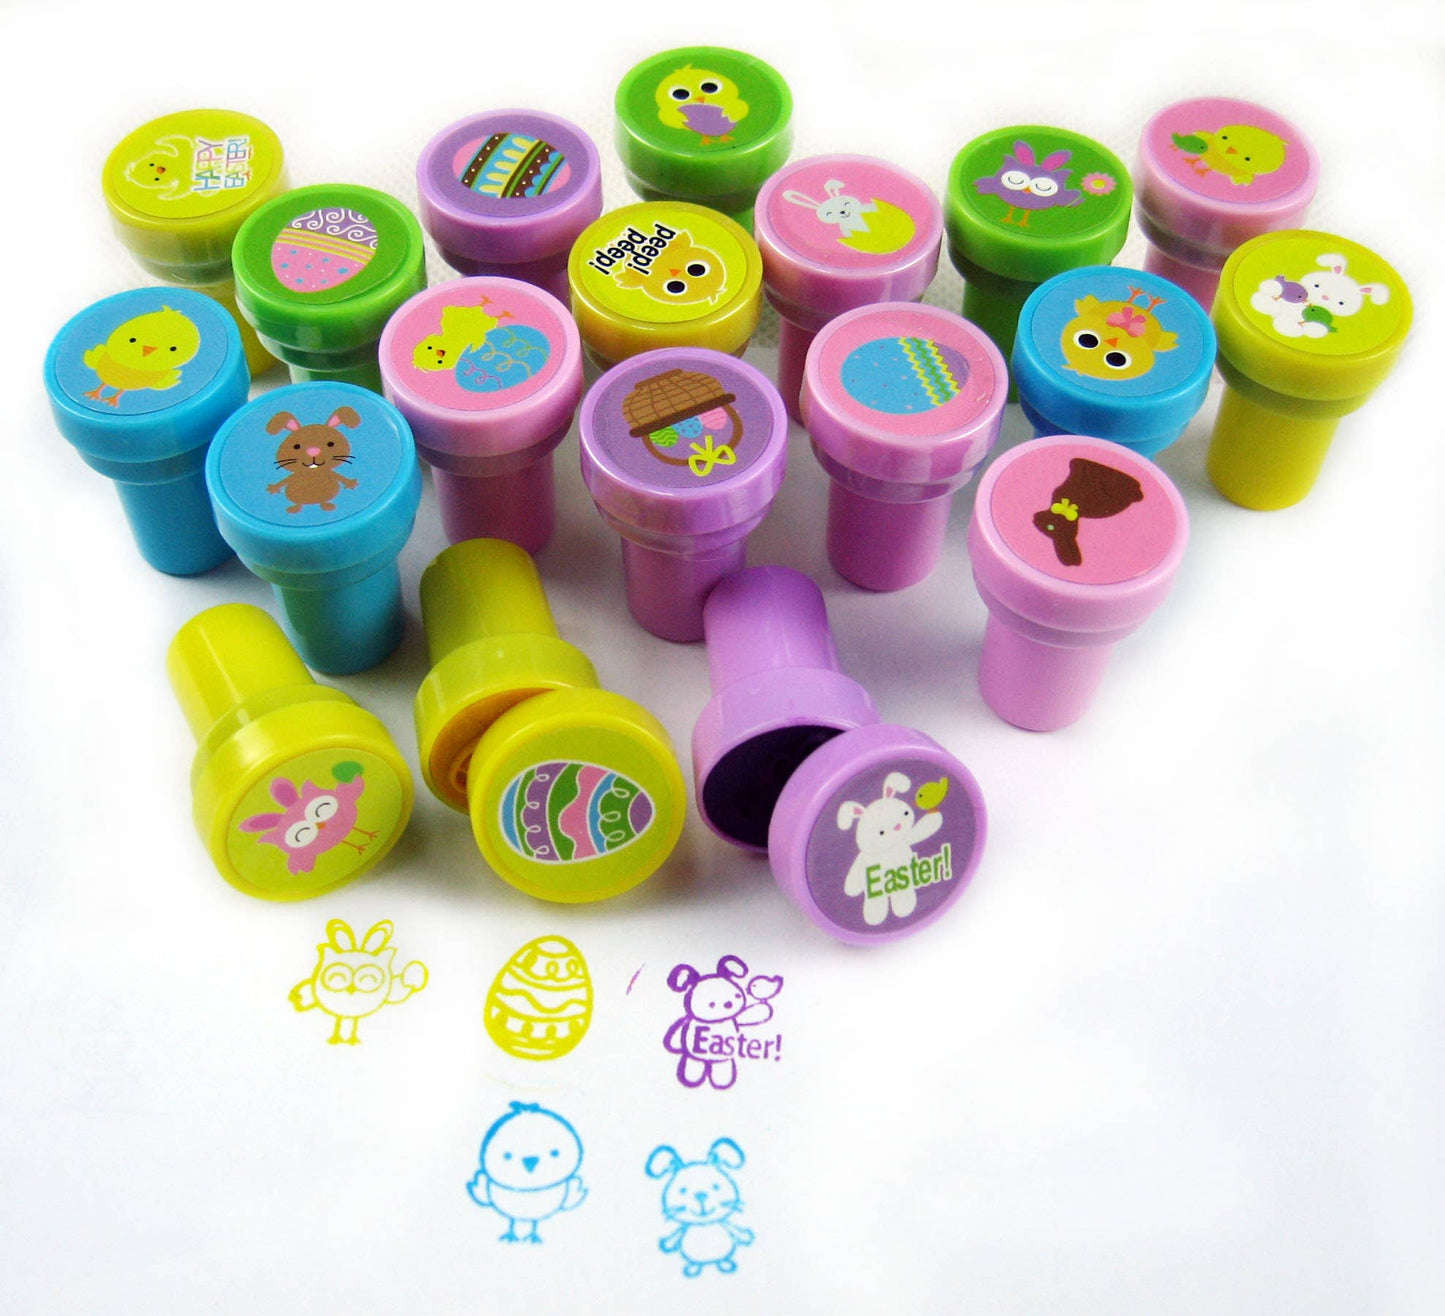 50 Pcs Easter Assorted Stampers for Kids